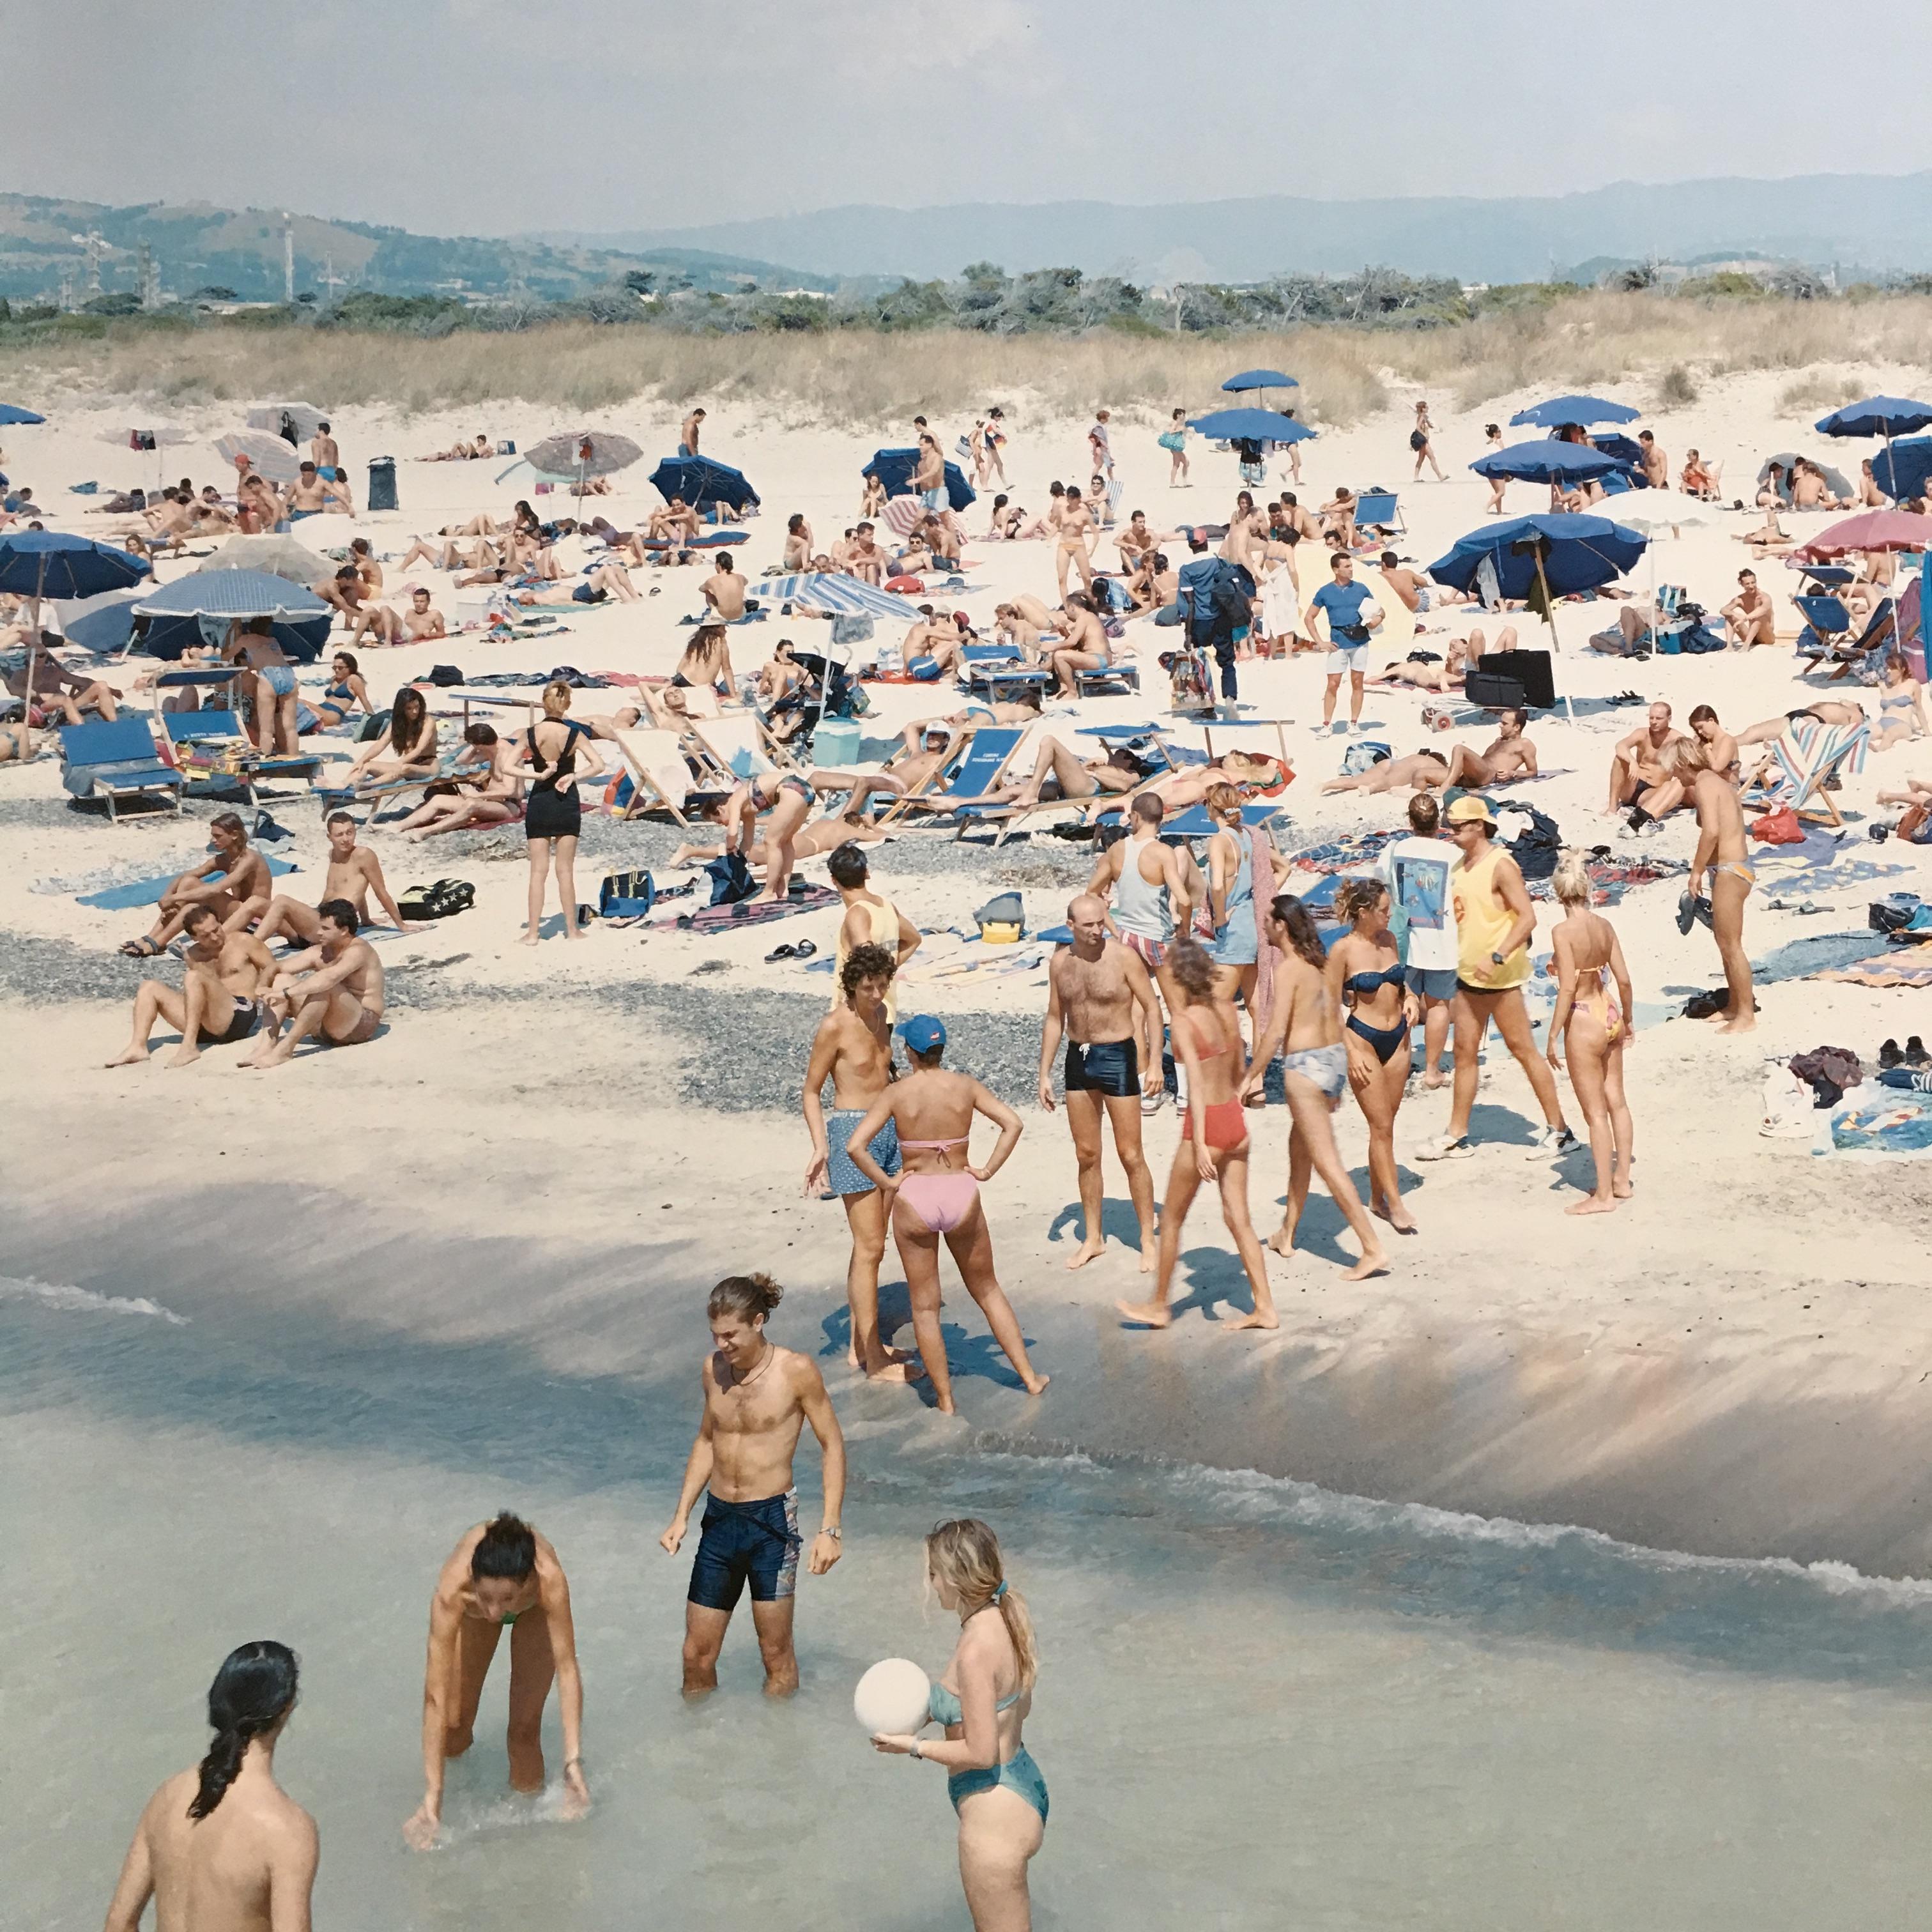 Massimo Vitali (born 1944) 
Rosignano, 2006.
One work from the portfolio Landscapes with Figures.
Offset lithograph in colors on smooth wove paper 
Printed by Steidl, Göttingen, Germany
Published by Brancolini Grimaldi, London
Photographer's stamp